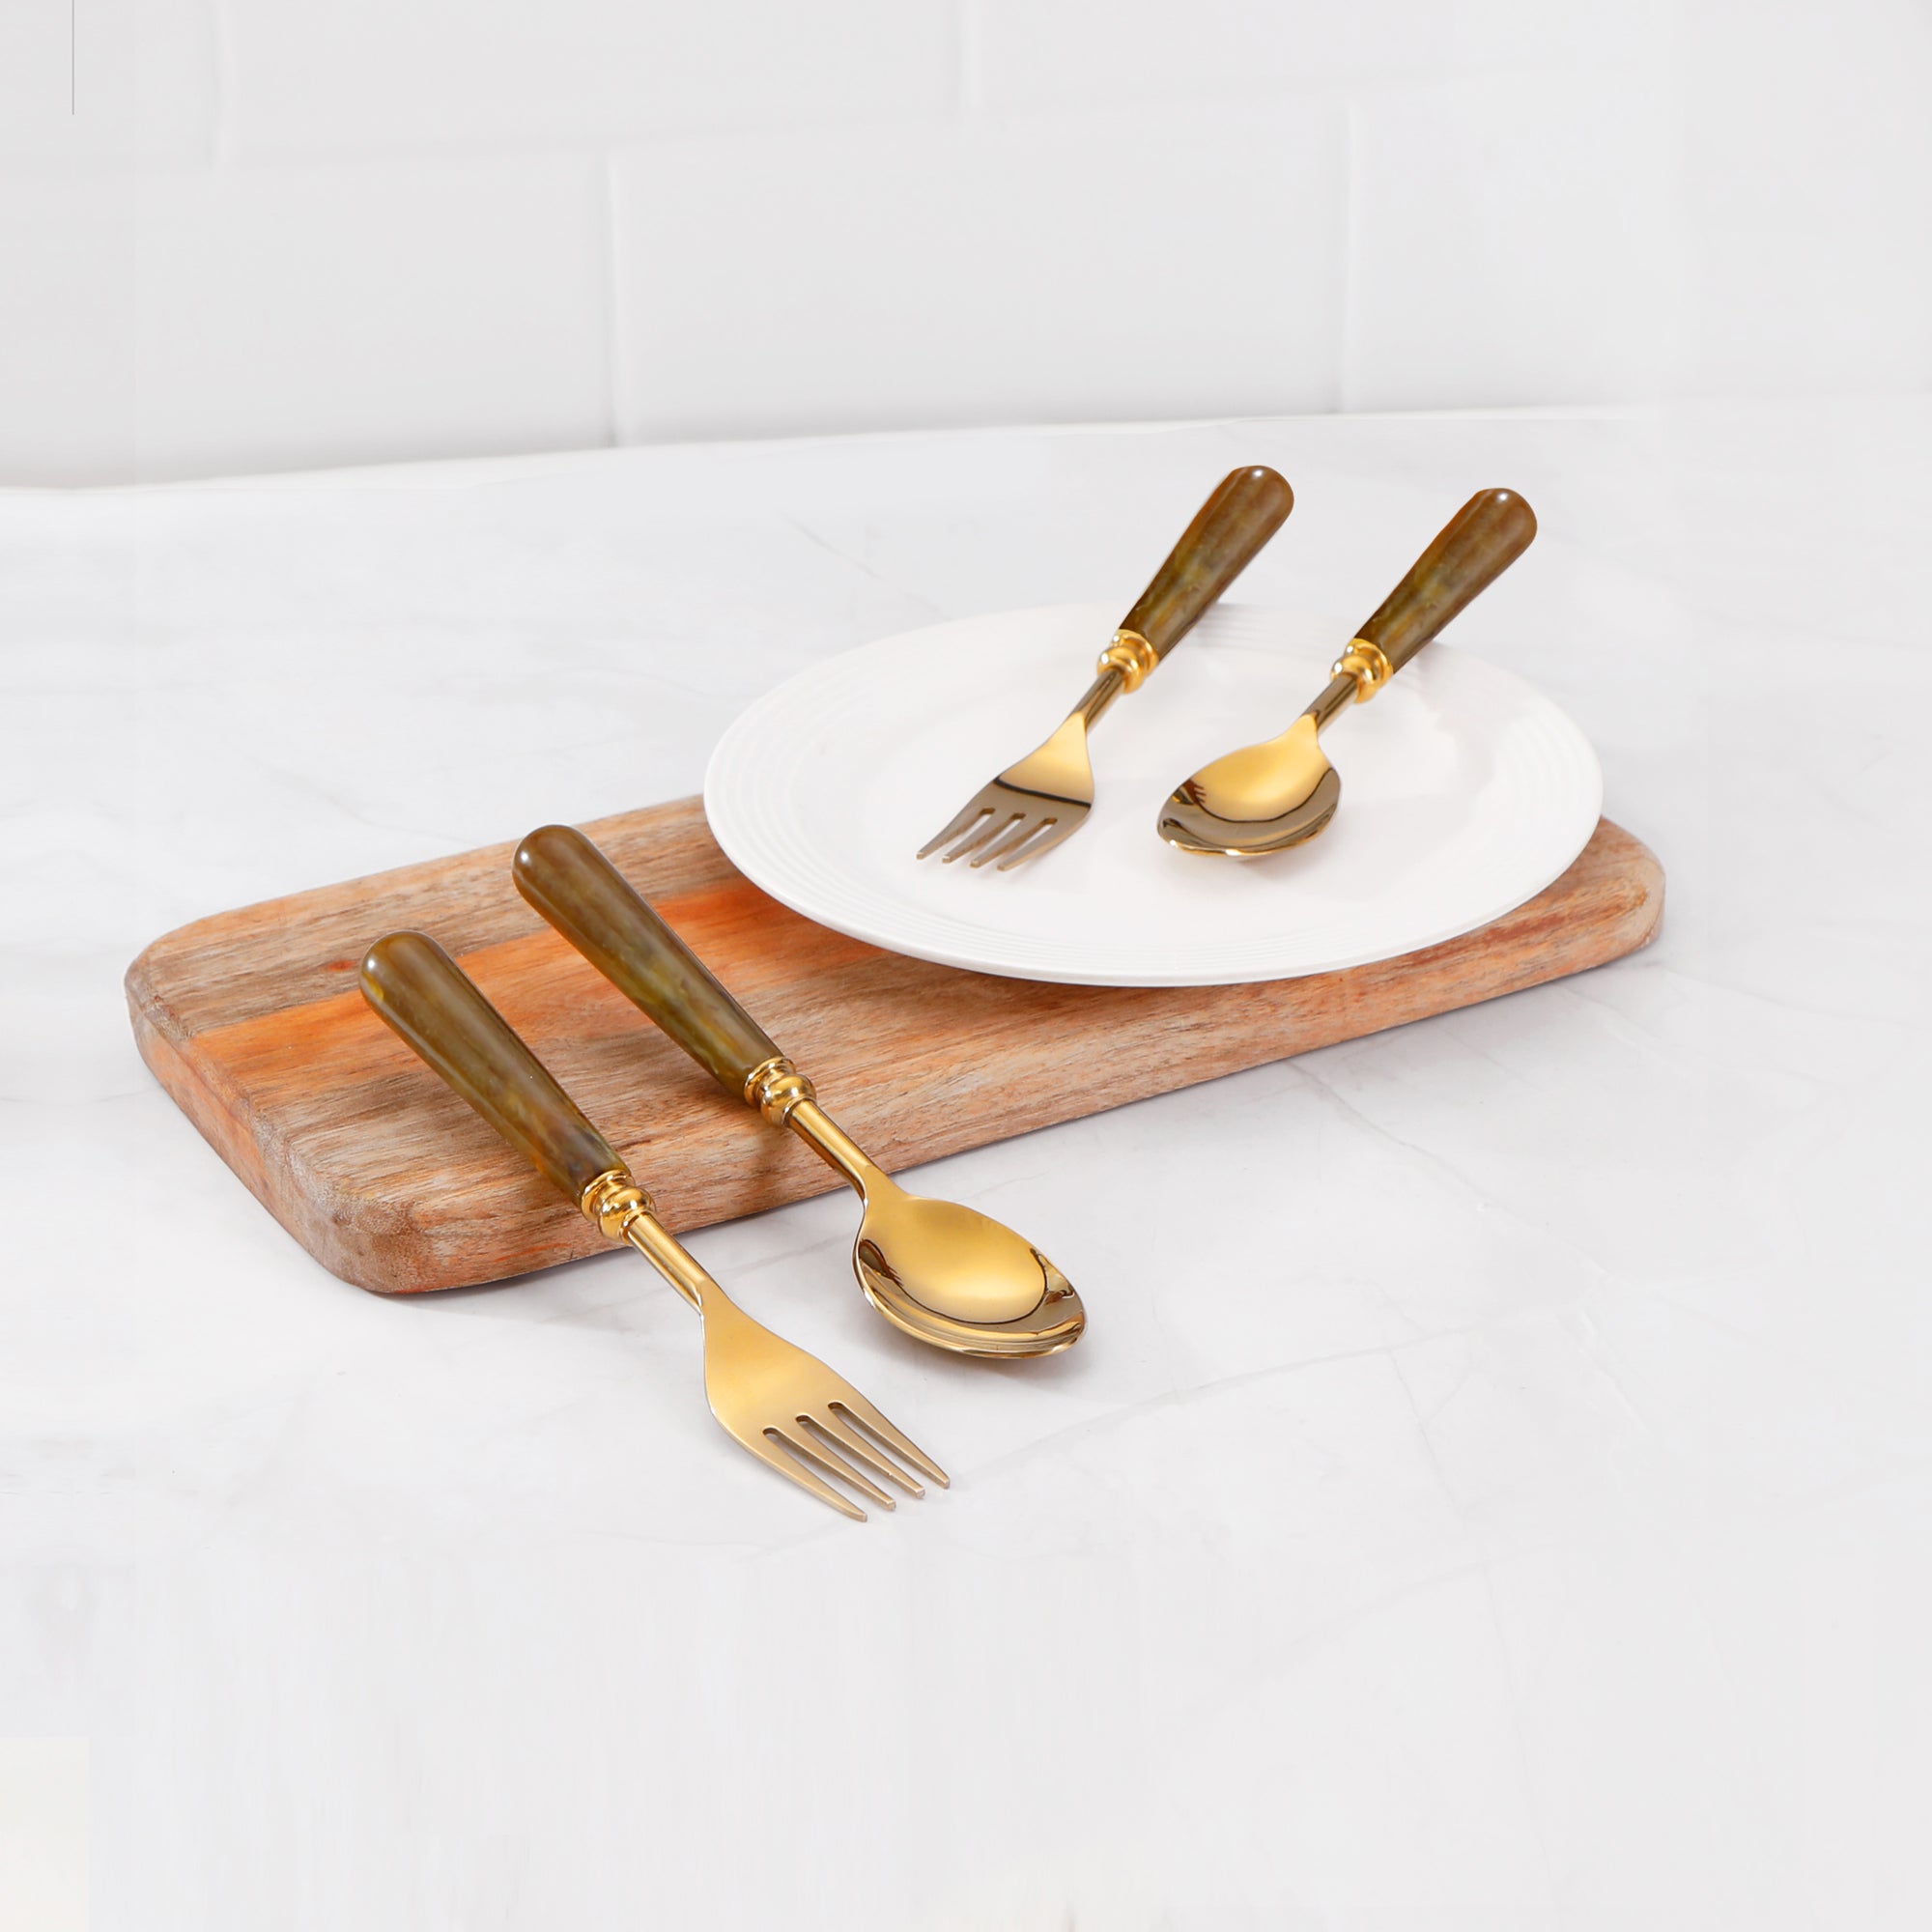 Cutlery Set - Brown Resin - The Home Co.Cutlery and Serving Set - Dinner Set of 12 pieces - Brown Resin - THE HOME CO.